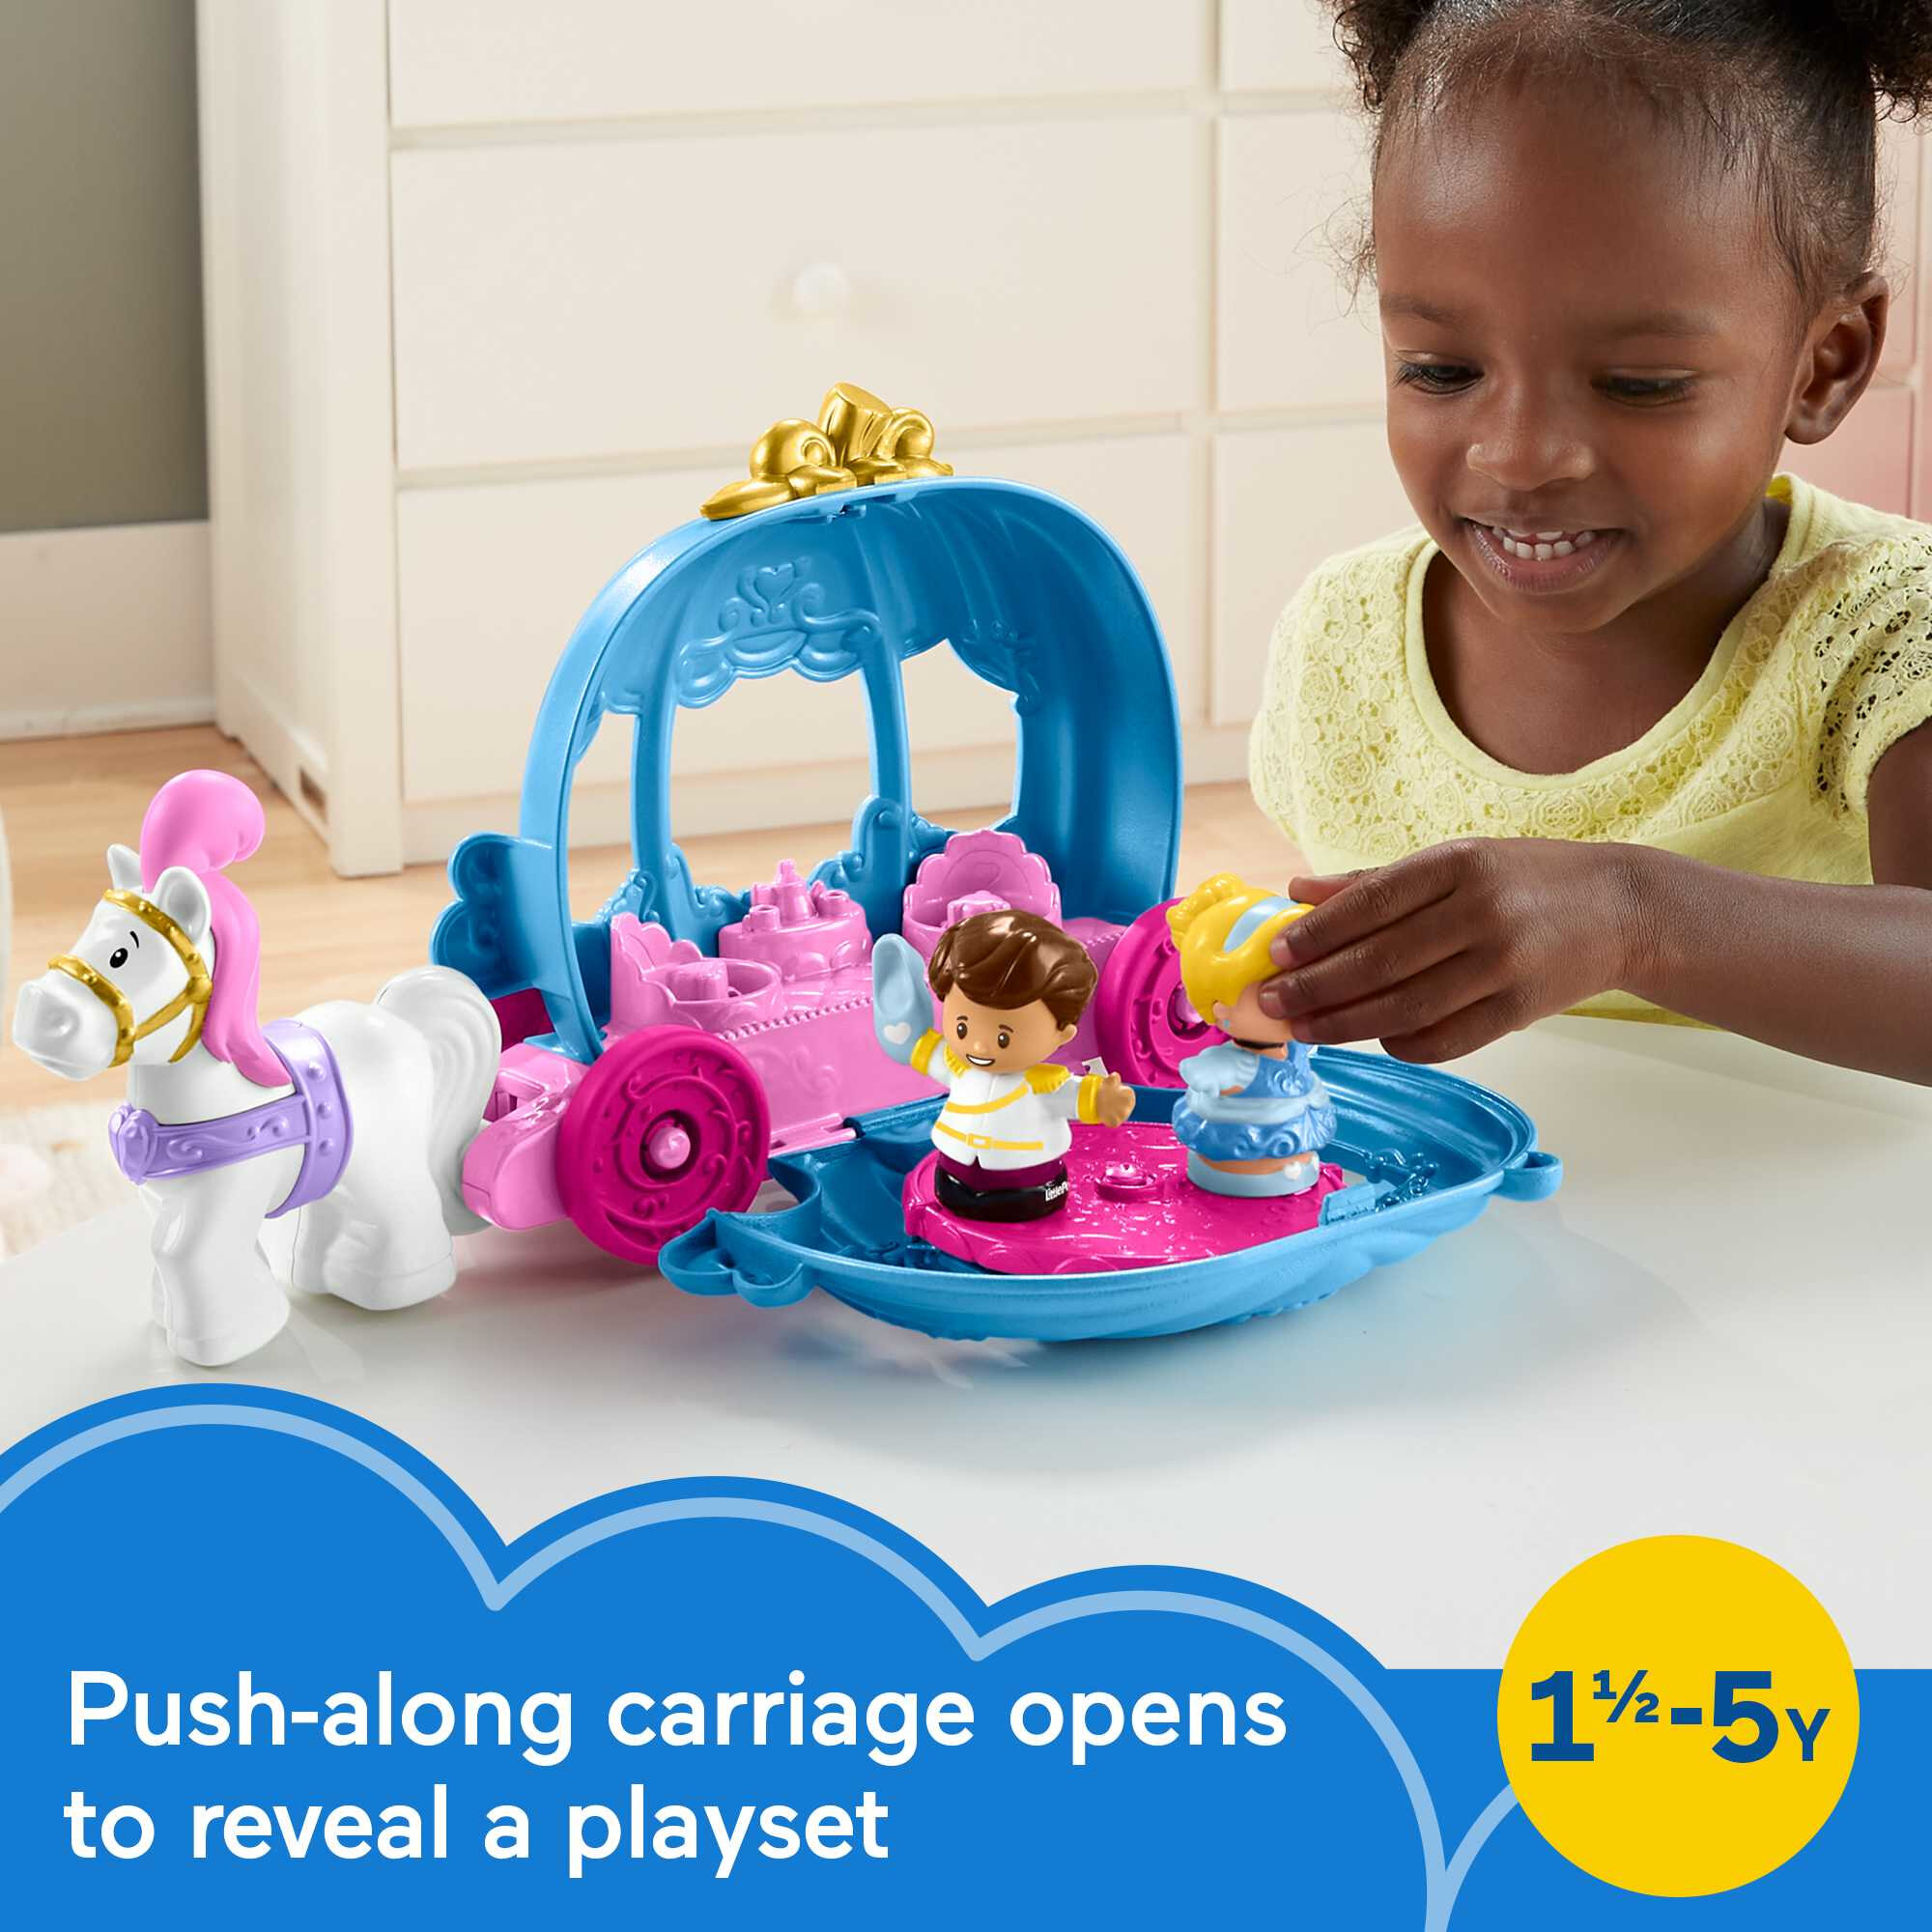 Disney Princess Cinderella’s Dancing Carriage Little People Toddler Playset with Horse & Figures - image 2 of 6